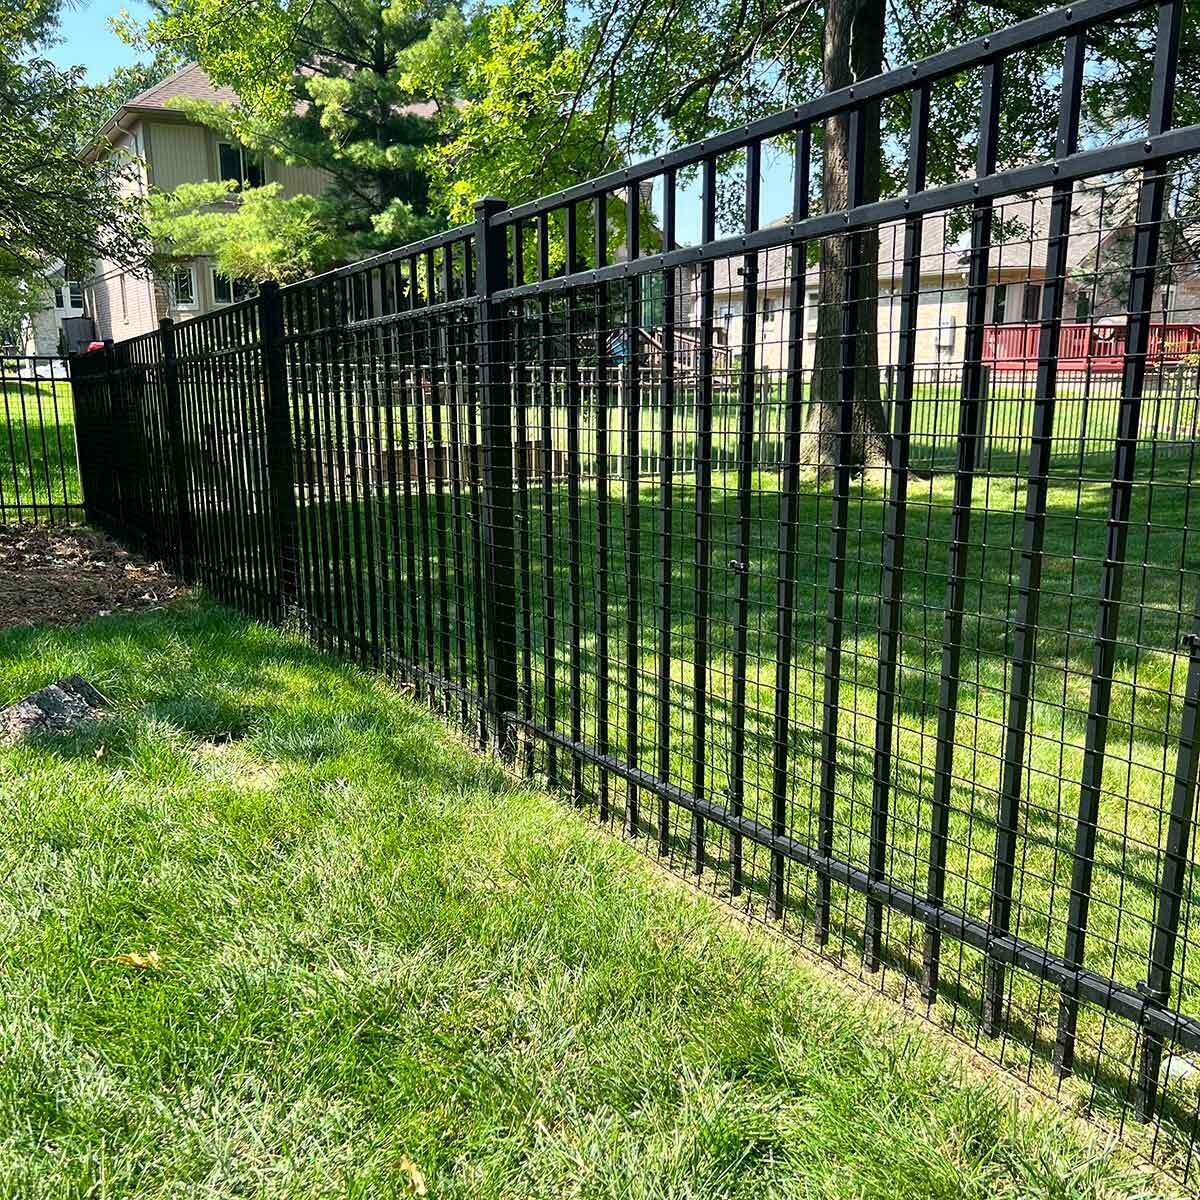 42-inch tall dog barrier panel designed to prevent pets from passing through existing fencing, by Dog Proofer.